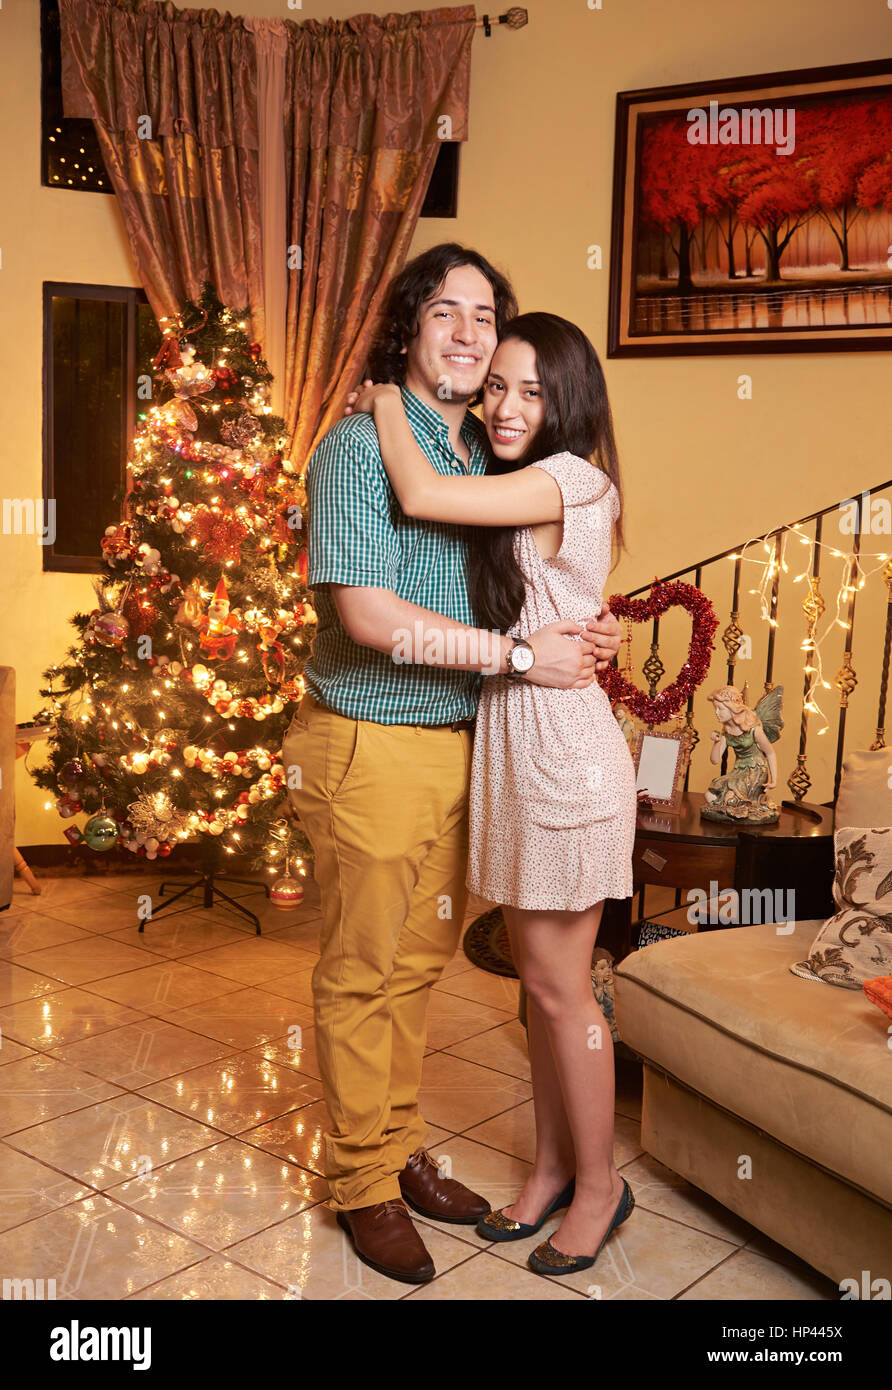 hugging young couple standing in house with christnas tree Stock Photo